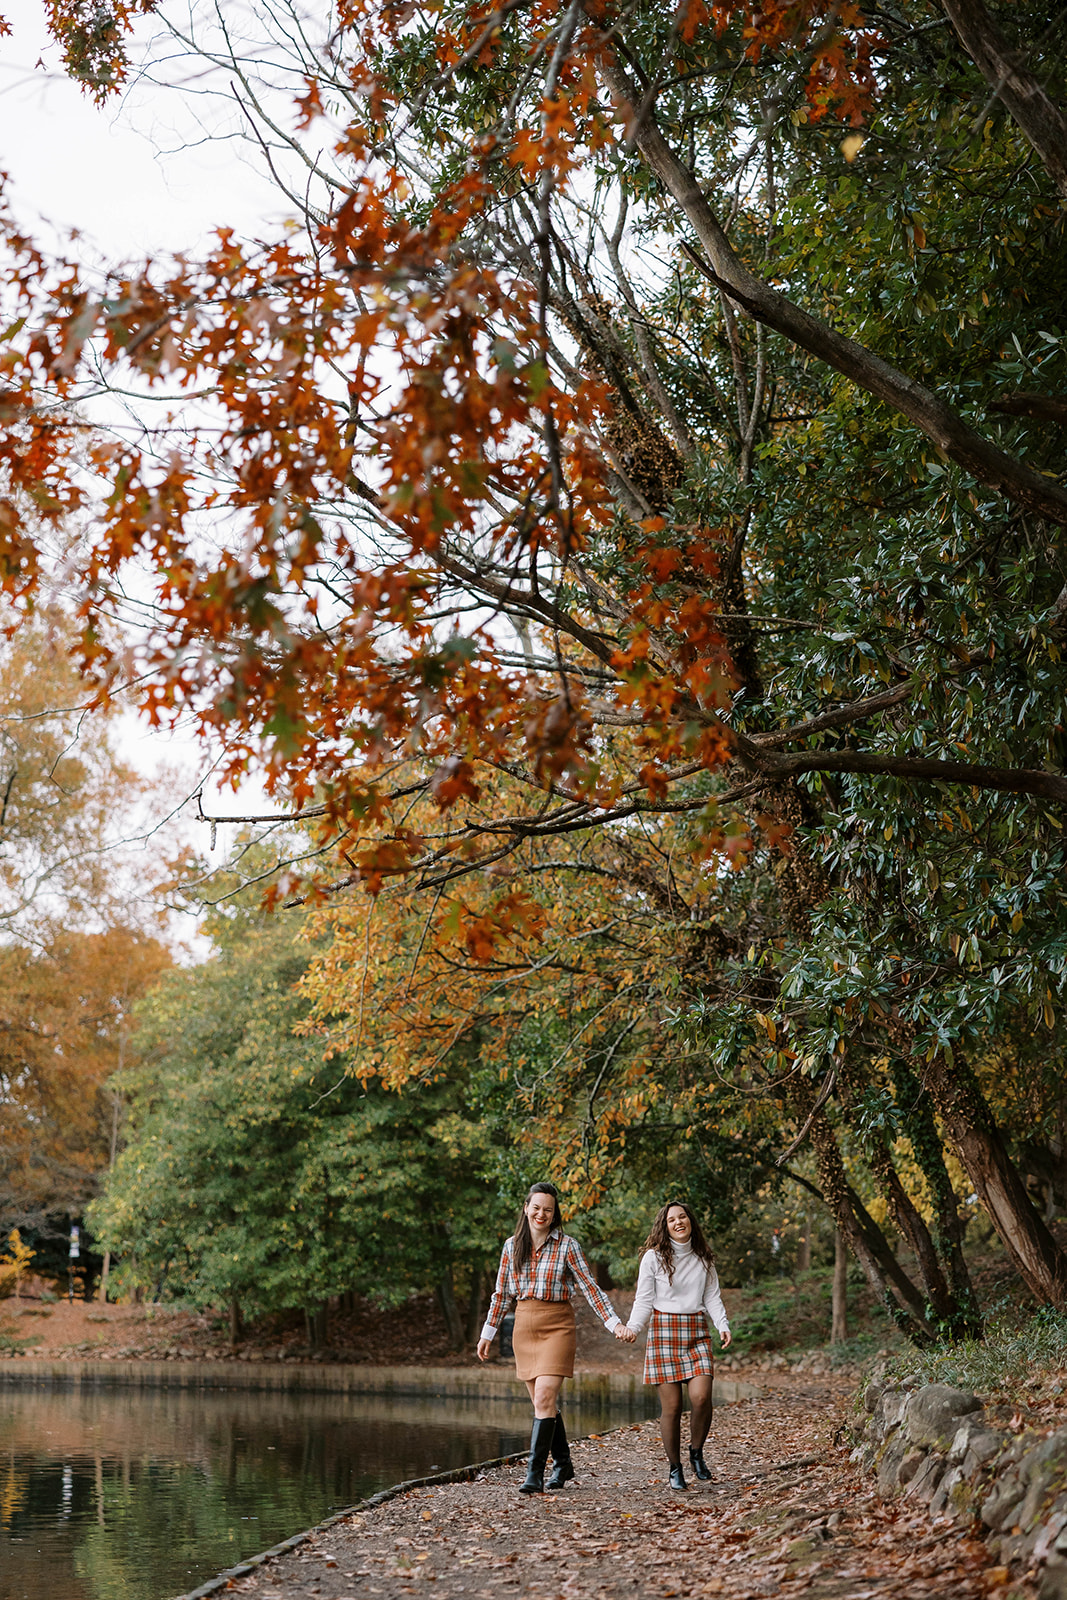 Piedmont Park photoshoot with two lesbian women walking toward the camera in the fall colors.